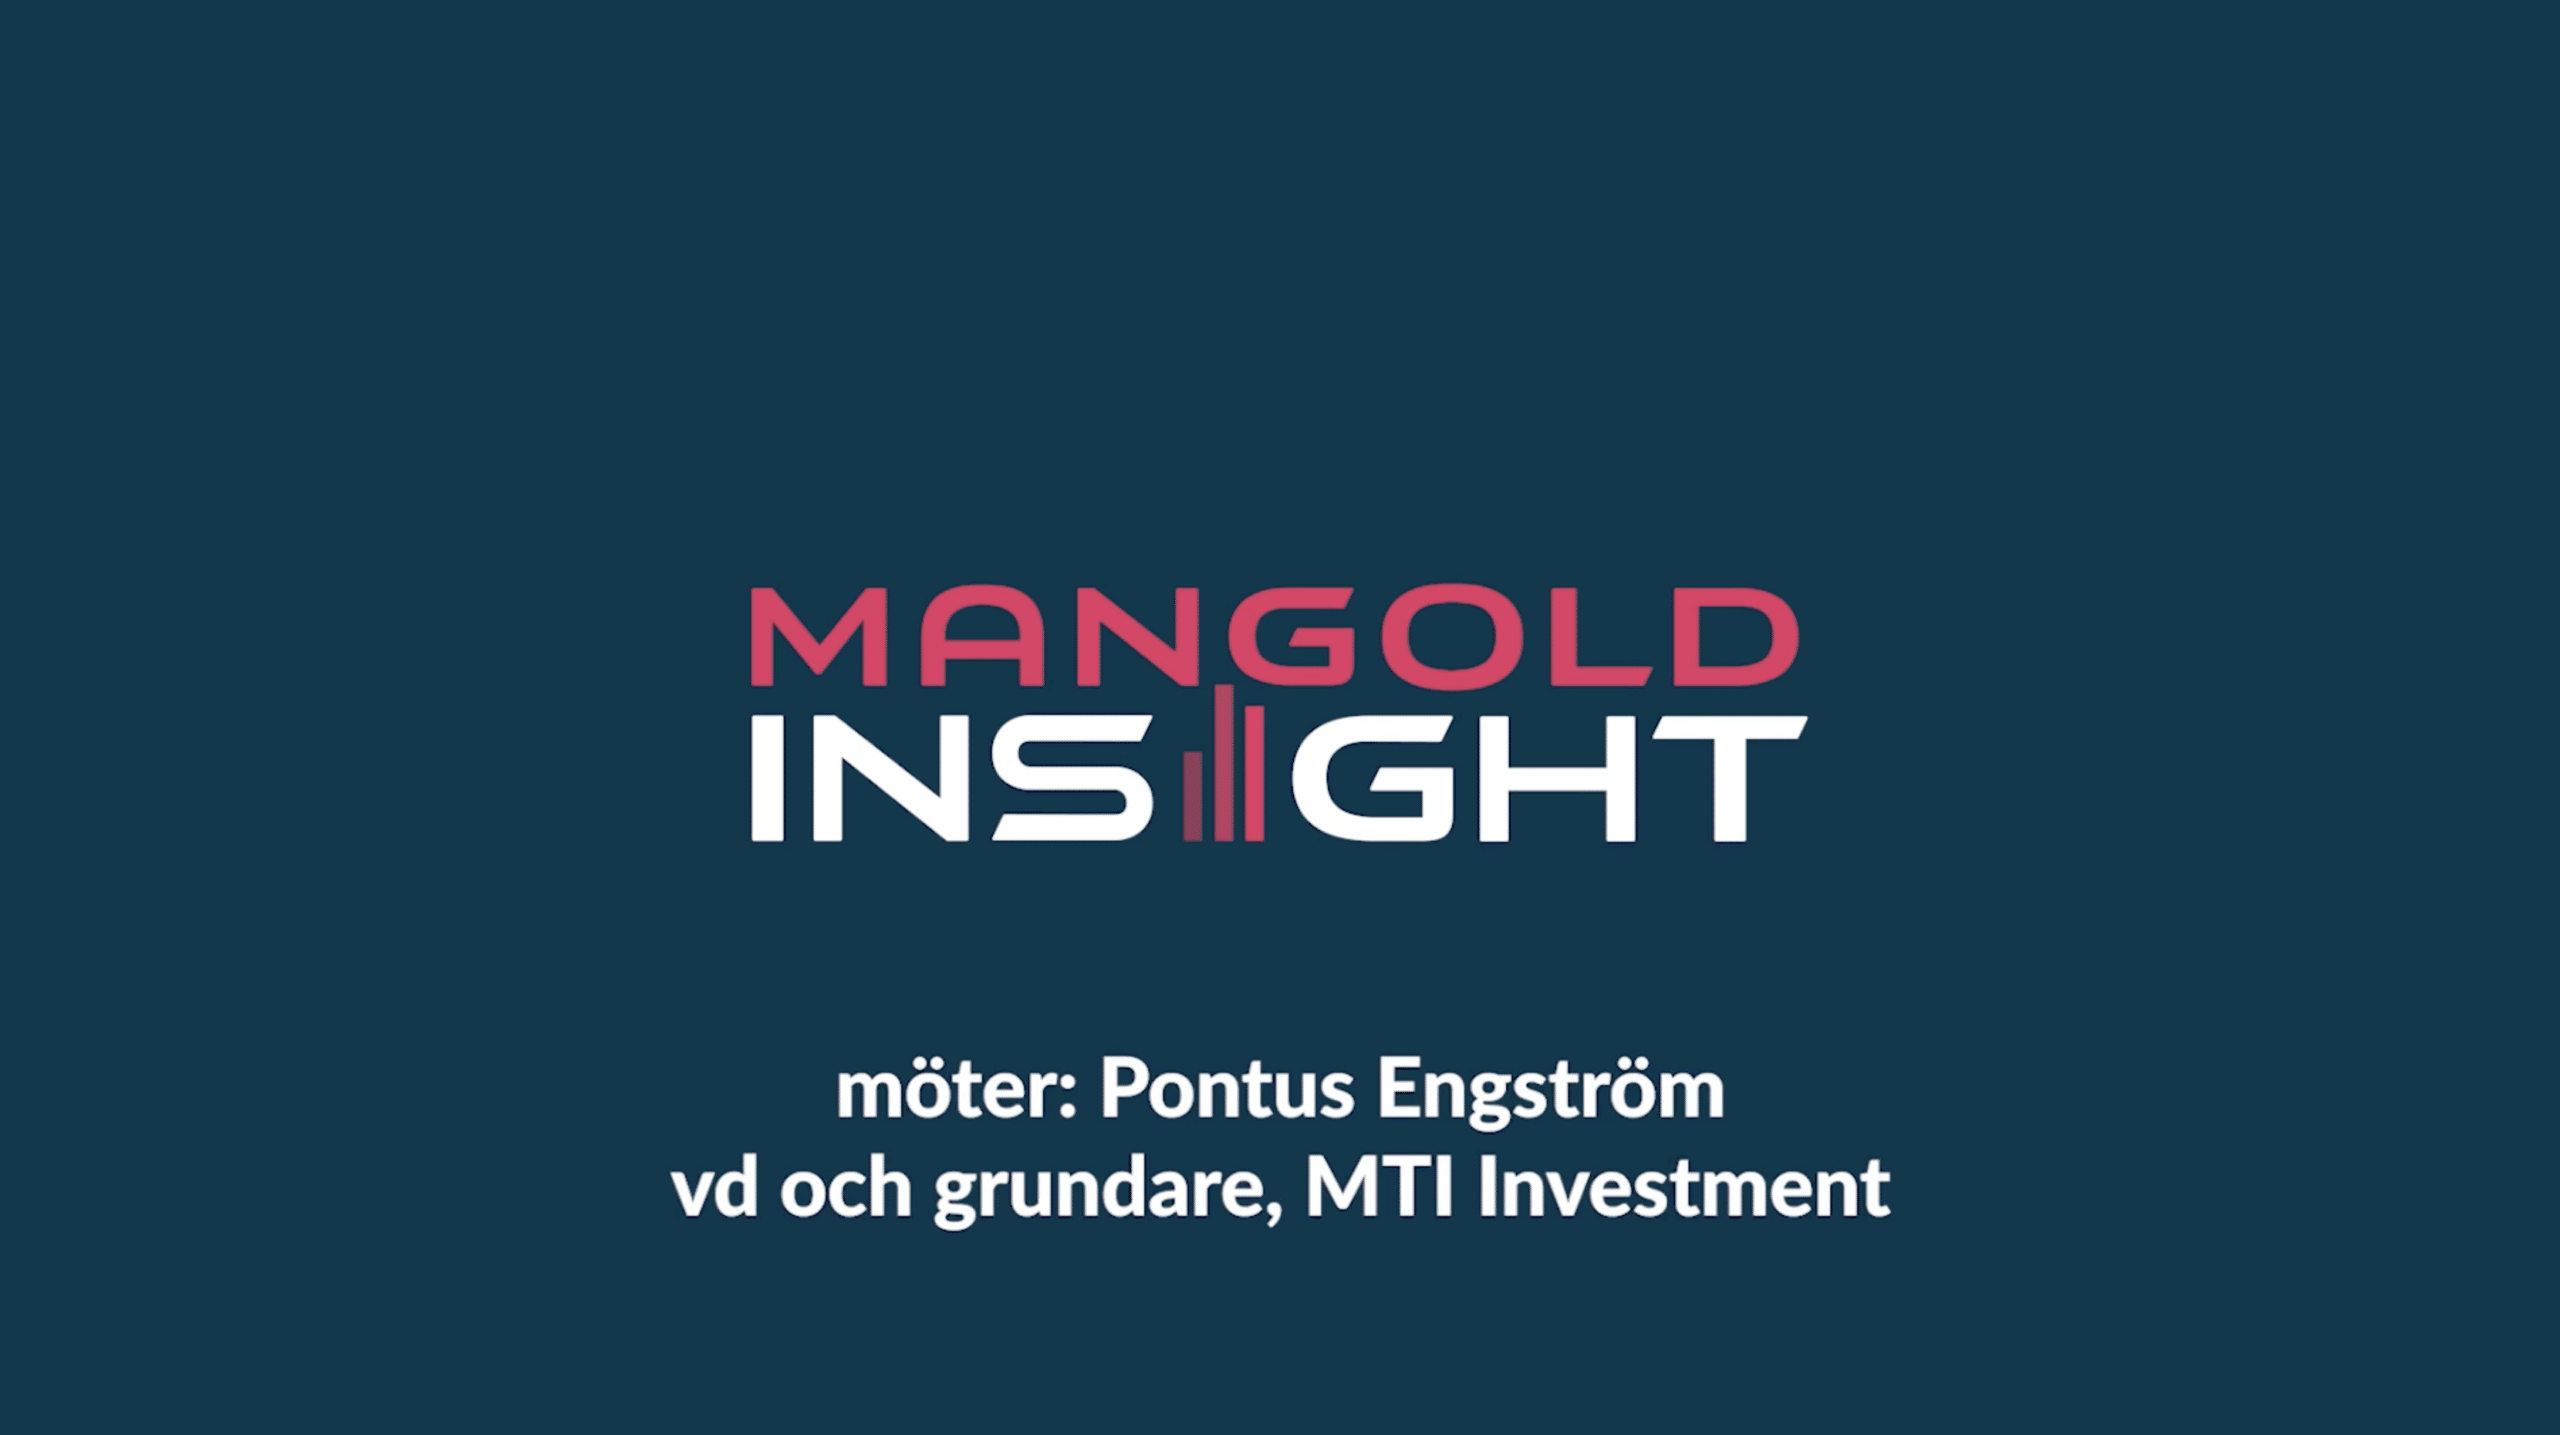 Promo poster of the Mangold Insight